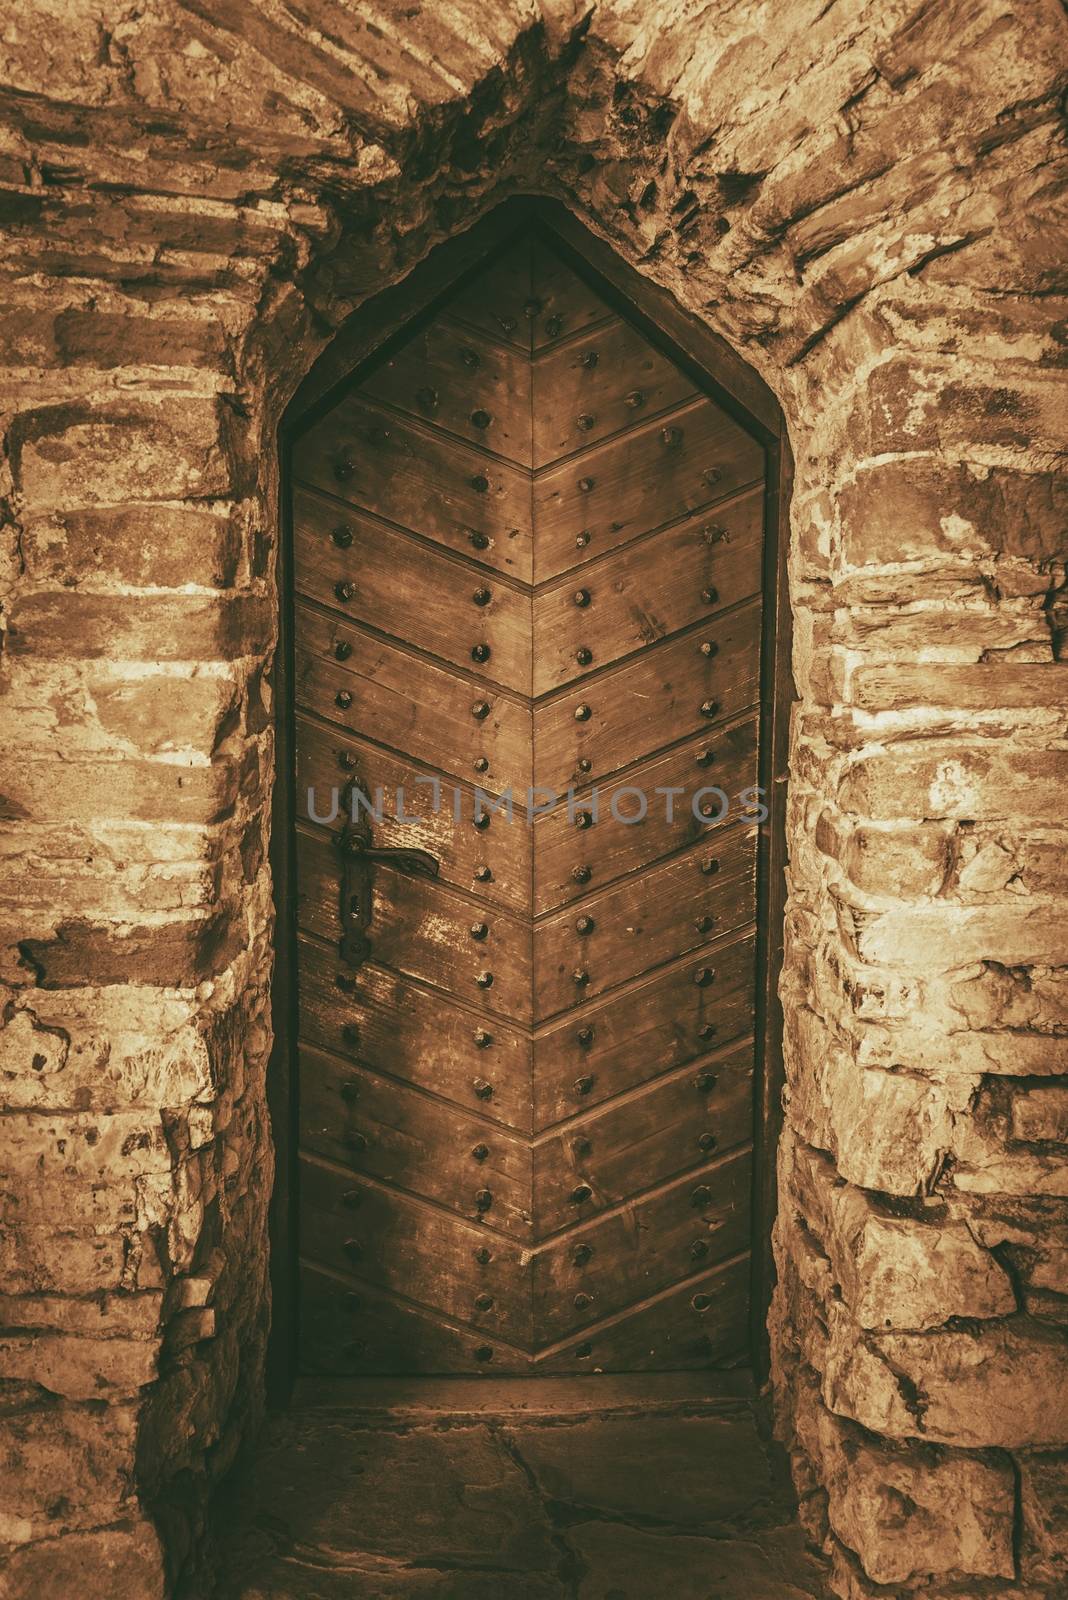 Vintage Wooden Castle Doors. Aged Stone Walls and the Medieval Wooden Door.